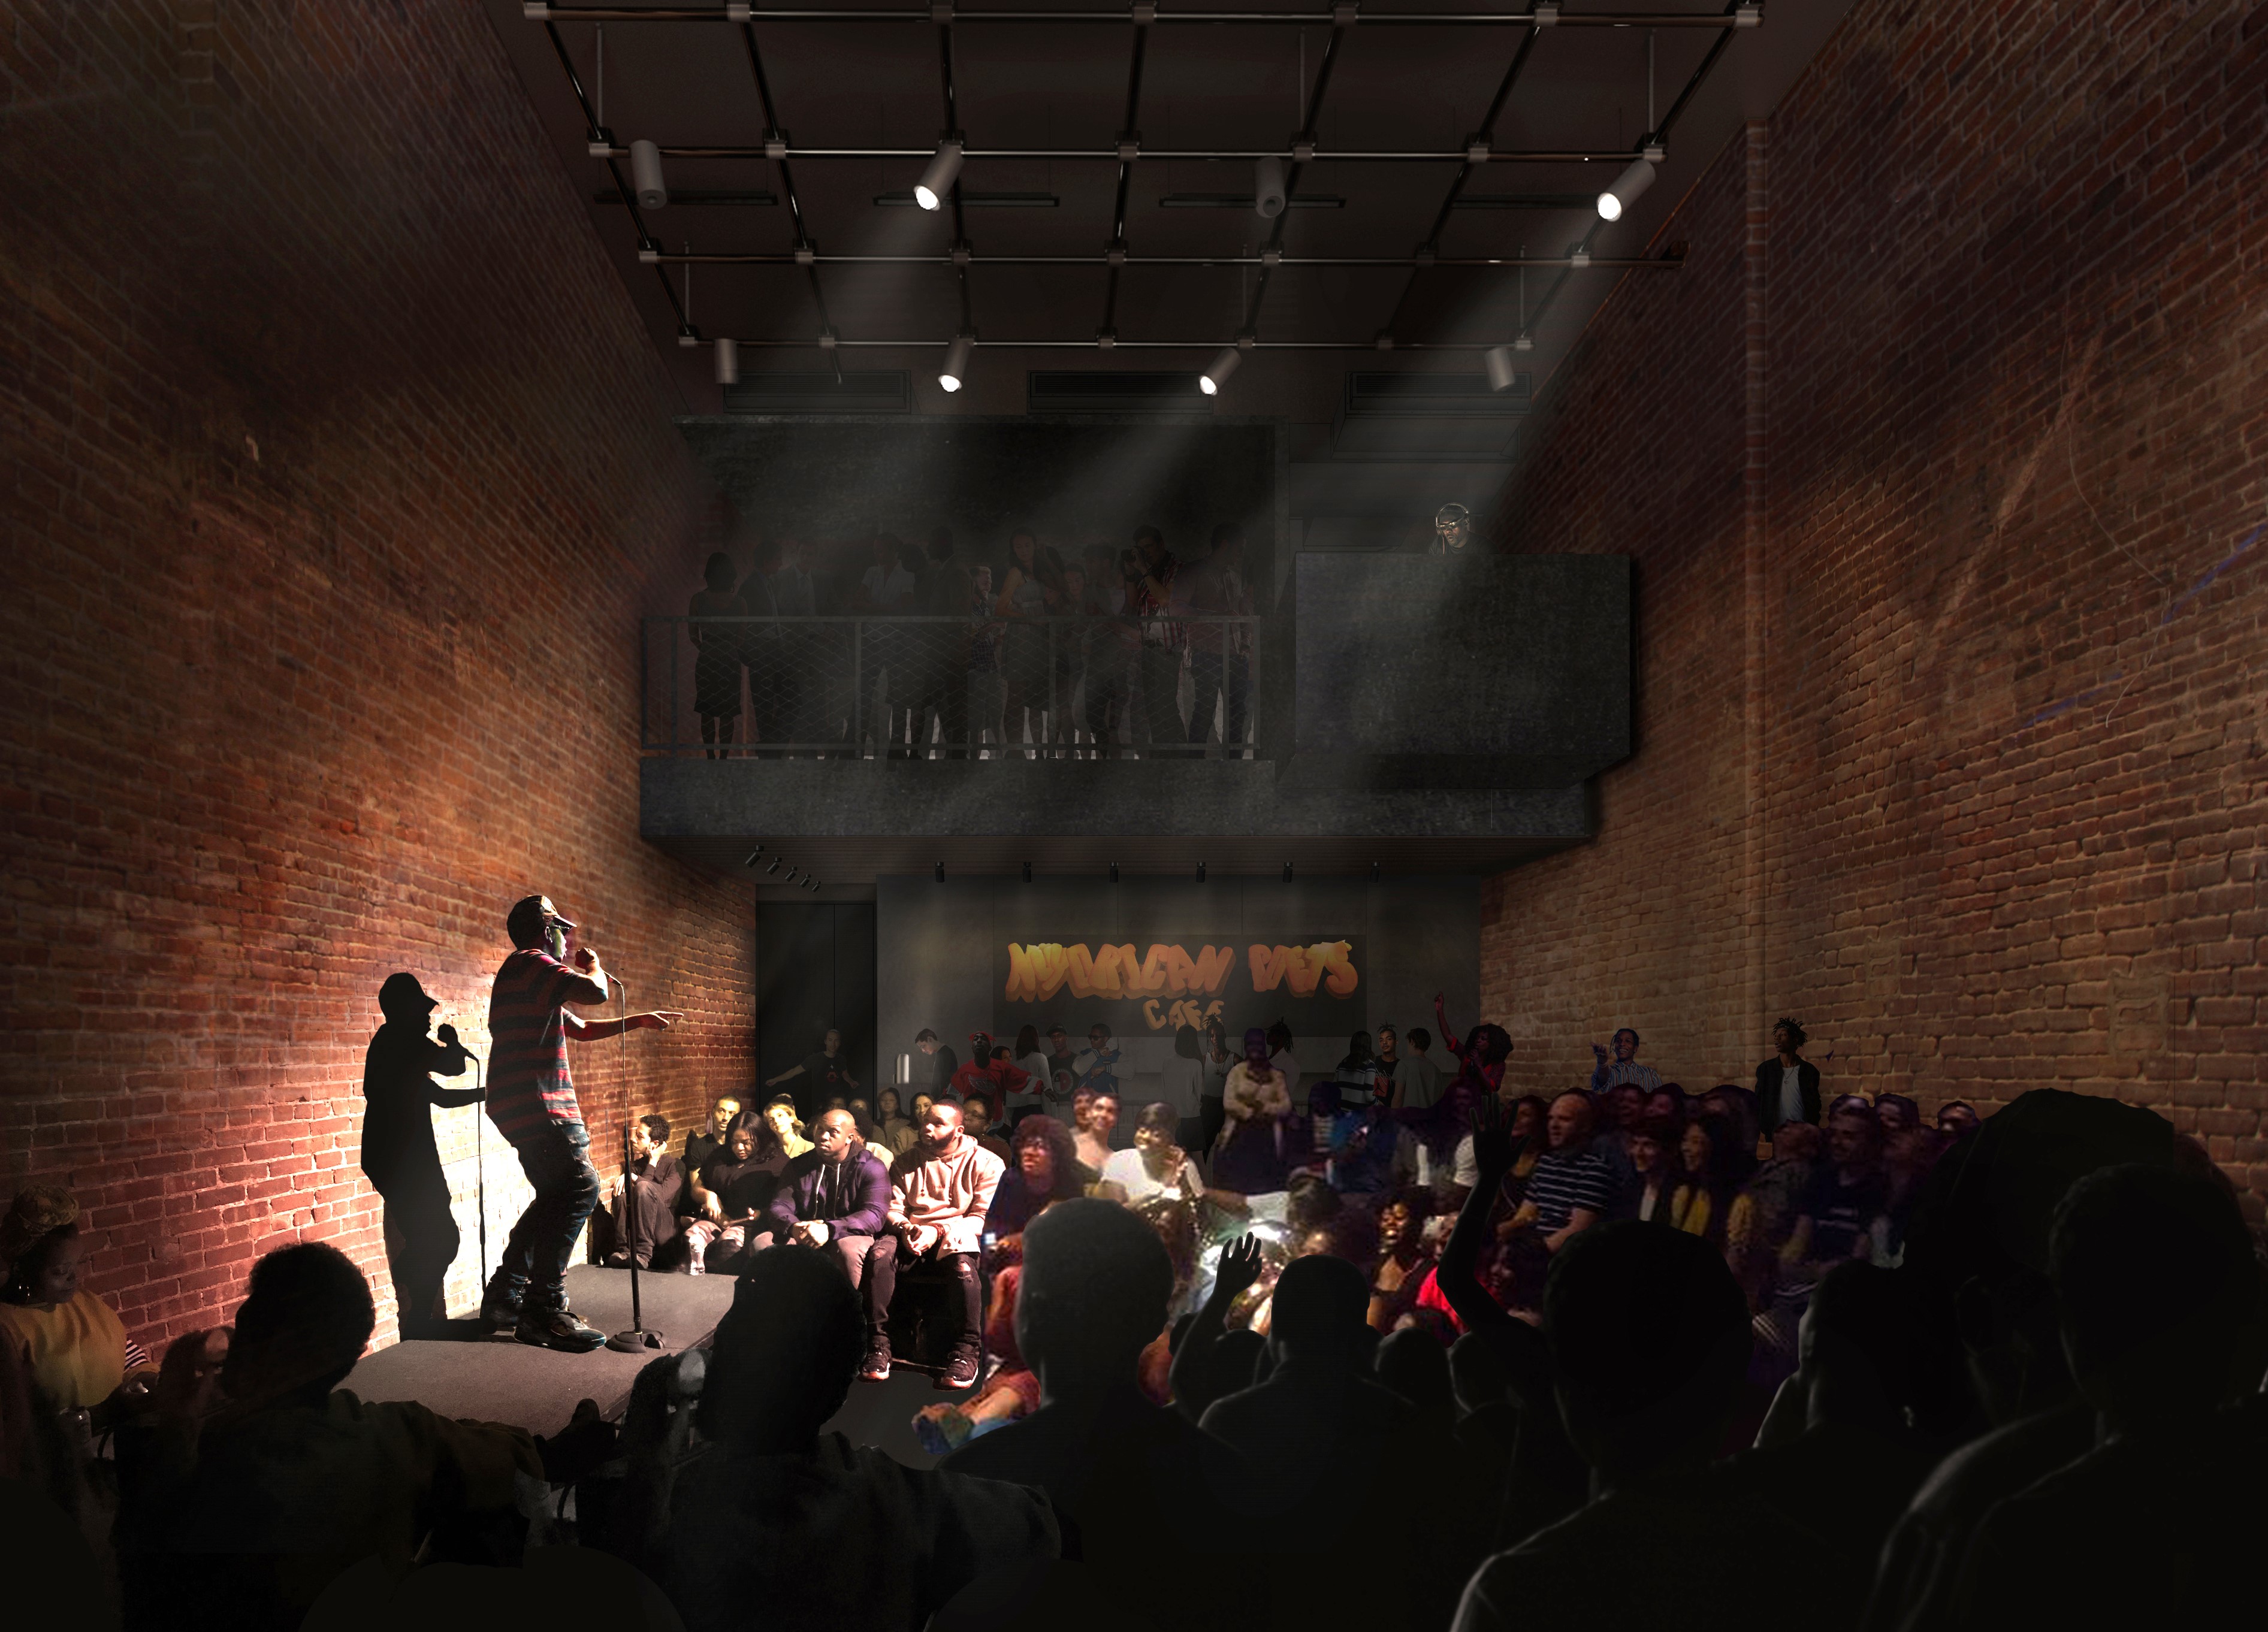 A rendering of a large performance space with an artist on stage.